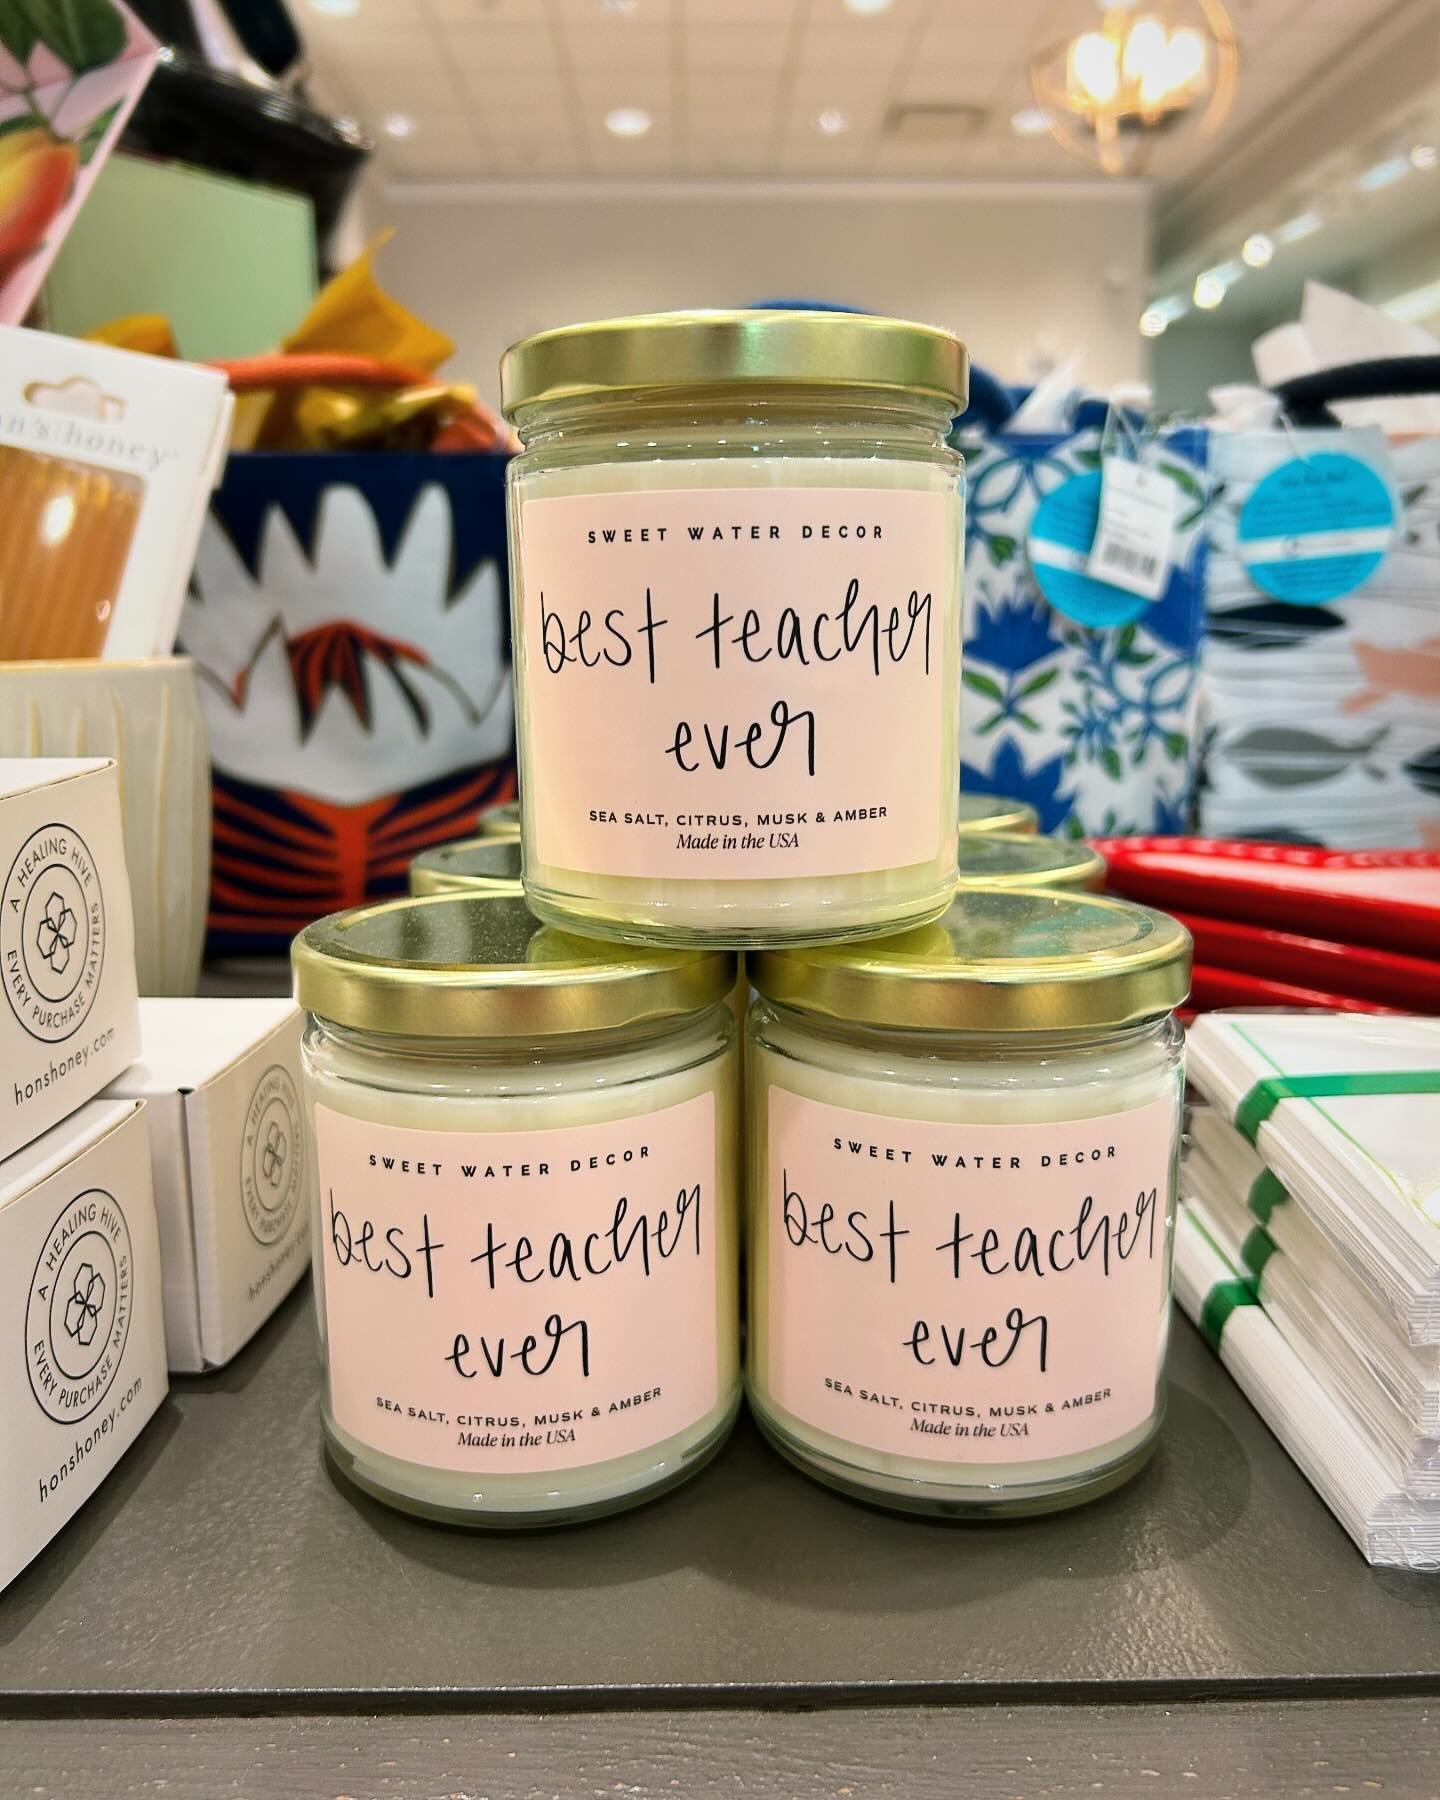 Perfect @sweetwaterdecor candle for teacher appreciation  week - begins May 6th! We have all the gifts you need. Stop by today for best selection. Open til 6pm @thecrossingclarendon. 

#shoplocal #shopsmall #shoparl #clarendonva #teacherappreciation 